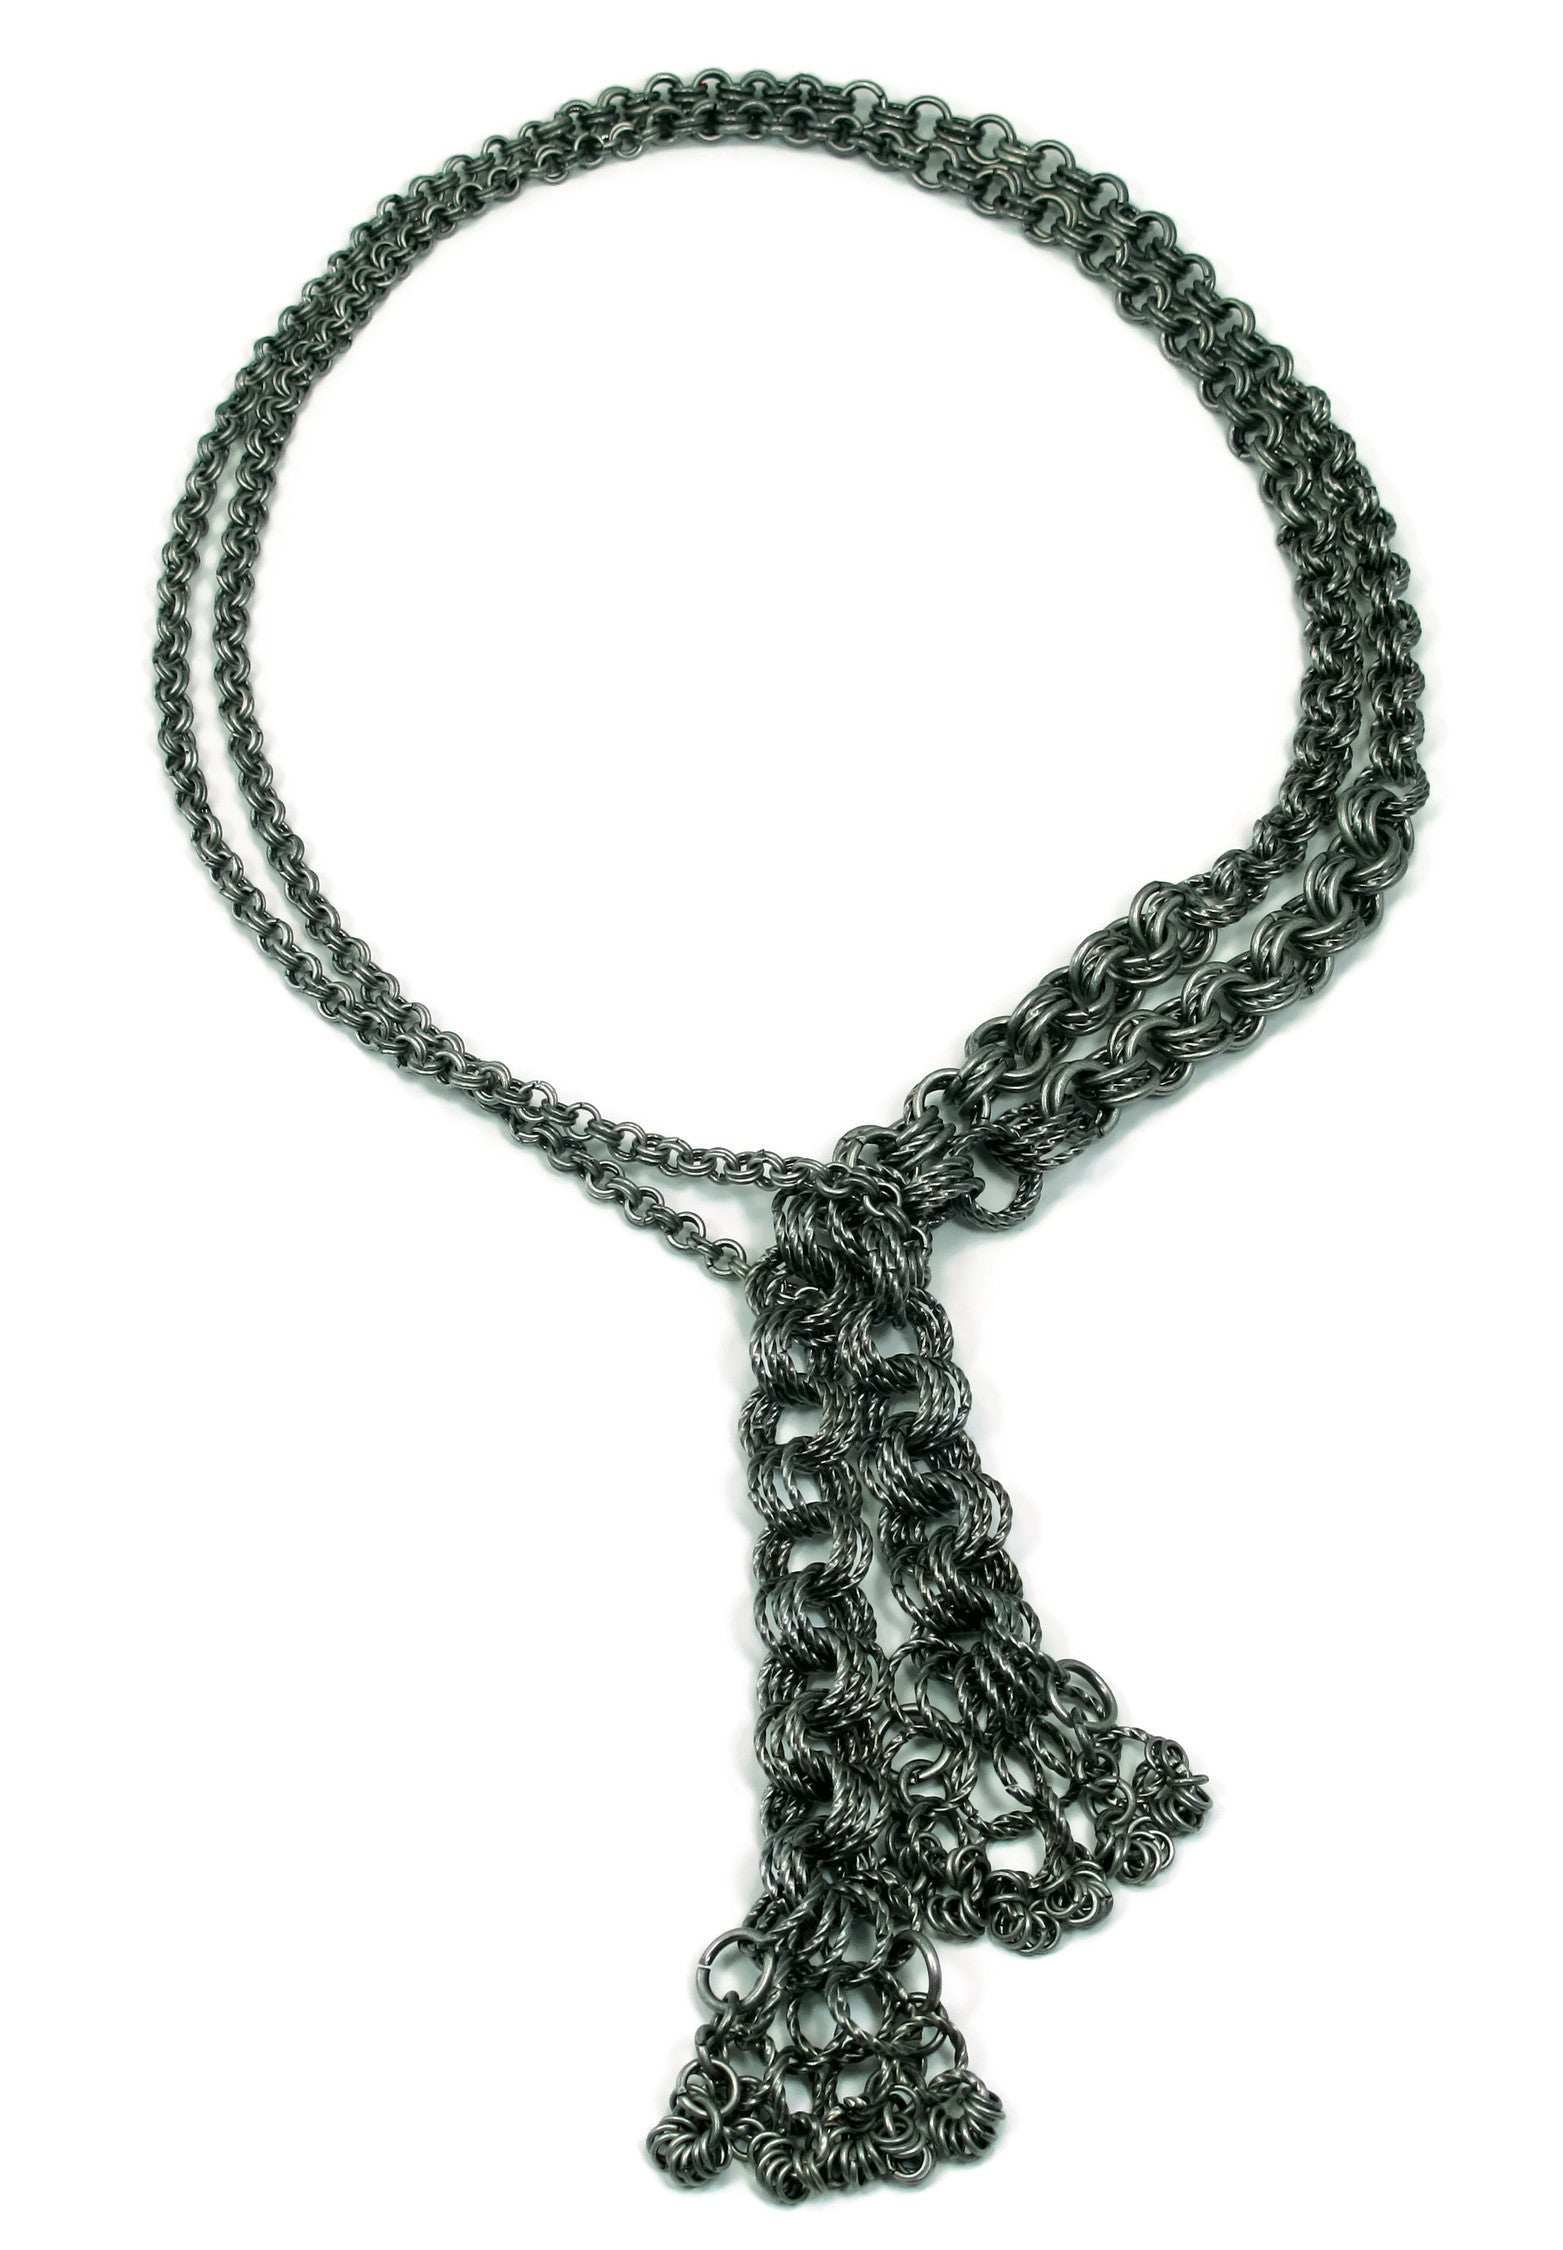 DIY Chain Mail Antique Silver Graduated Lariat Necklace Kit